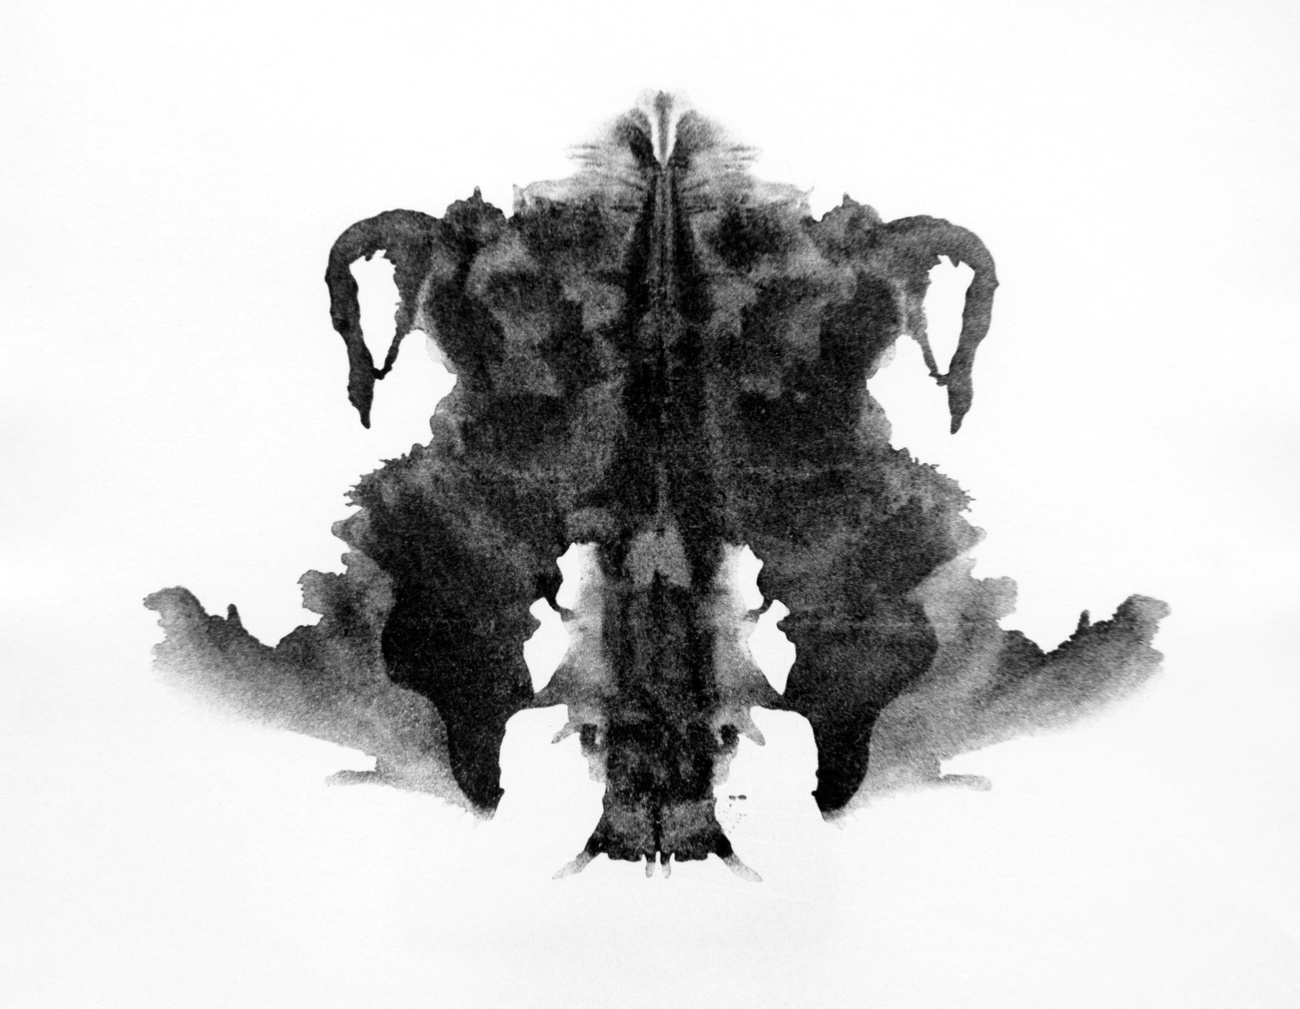 Books: The Inkblots: Hermann Rorschach, His Iconic Test and the Power of  Seeing by Damion Searls